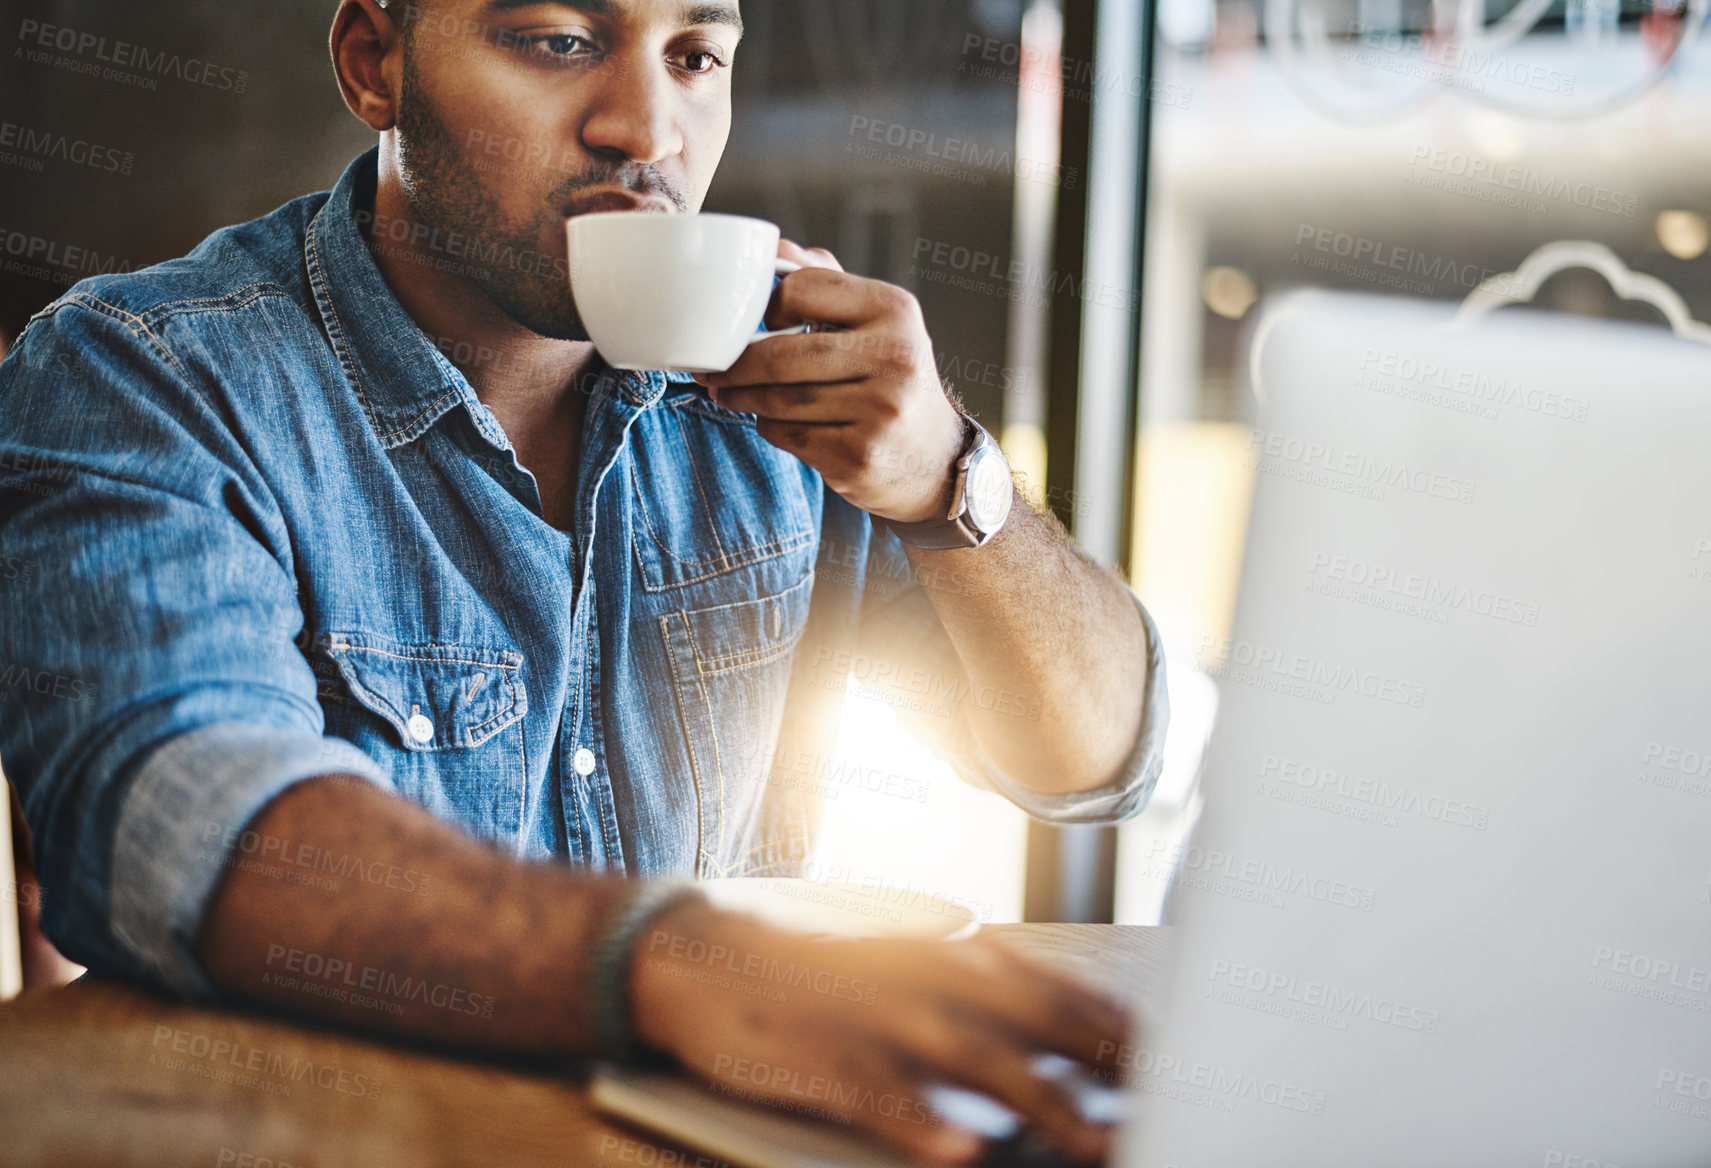 Buy stock photo Shot of a handsome young man drinking coffee while working working in a cafe